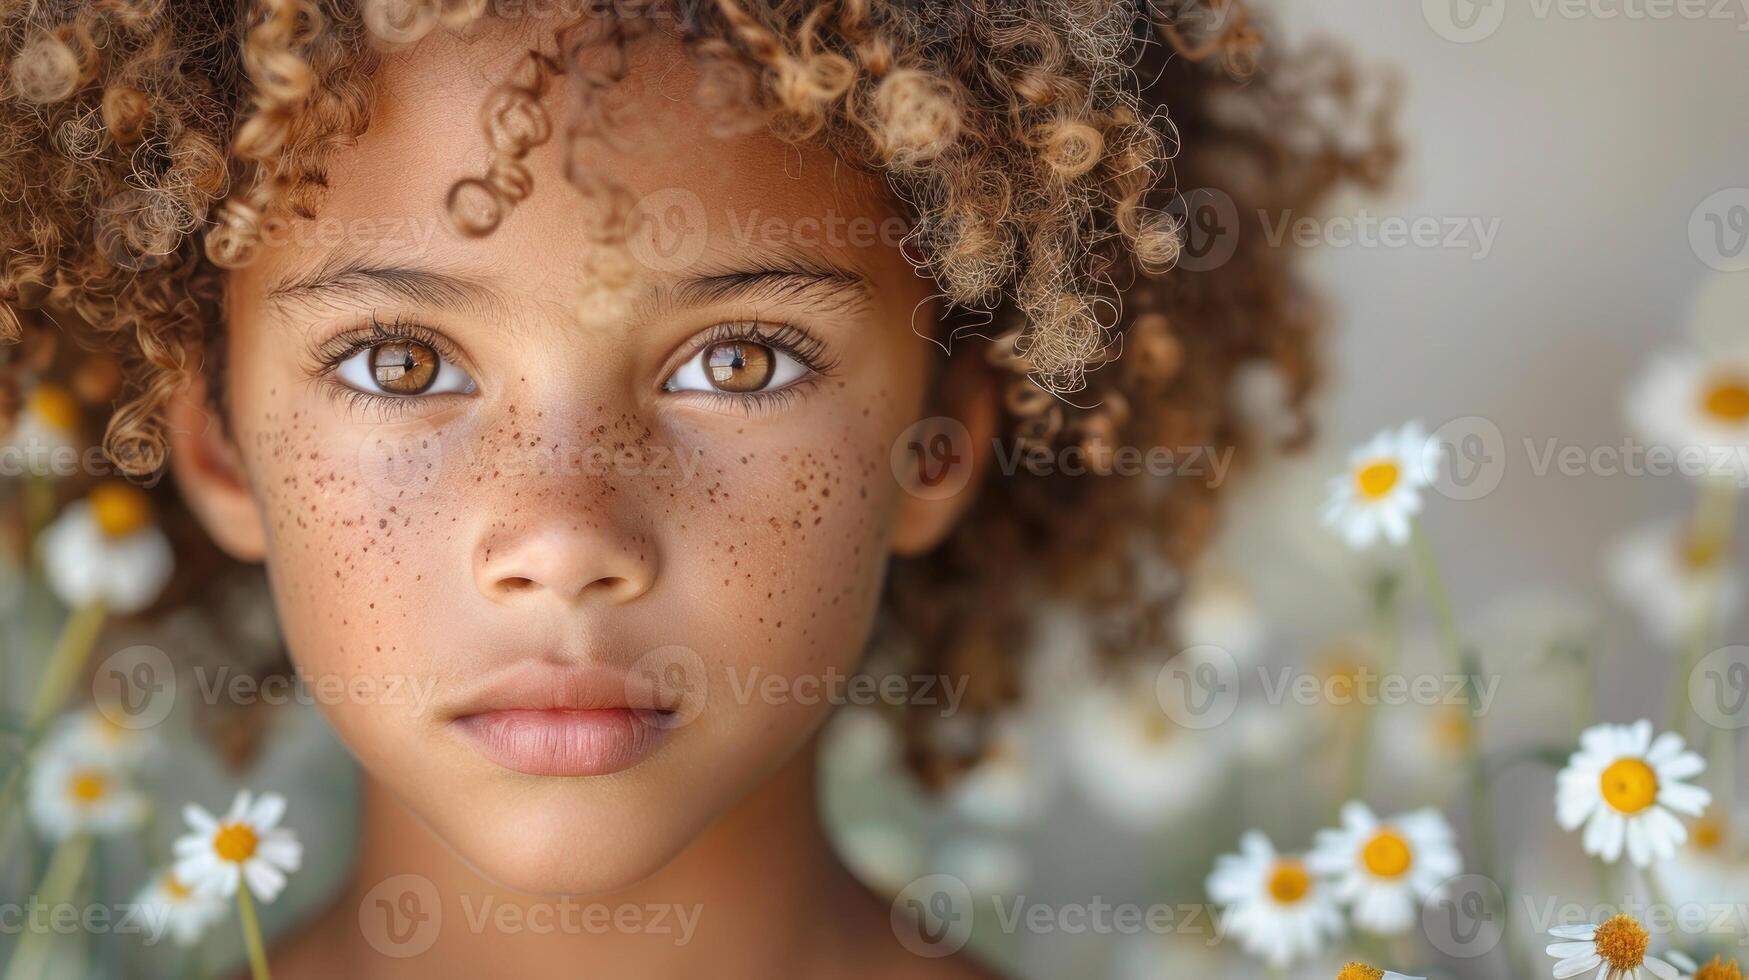 A young girl with freckles on her face photo